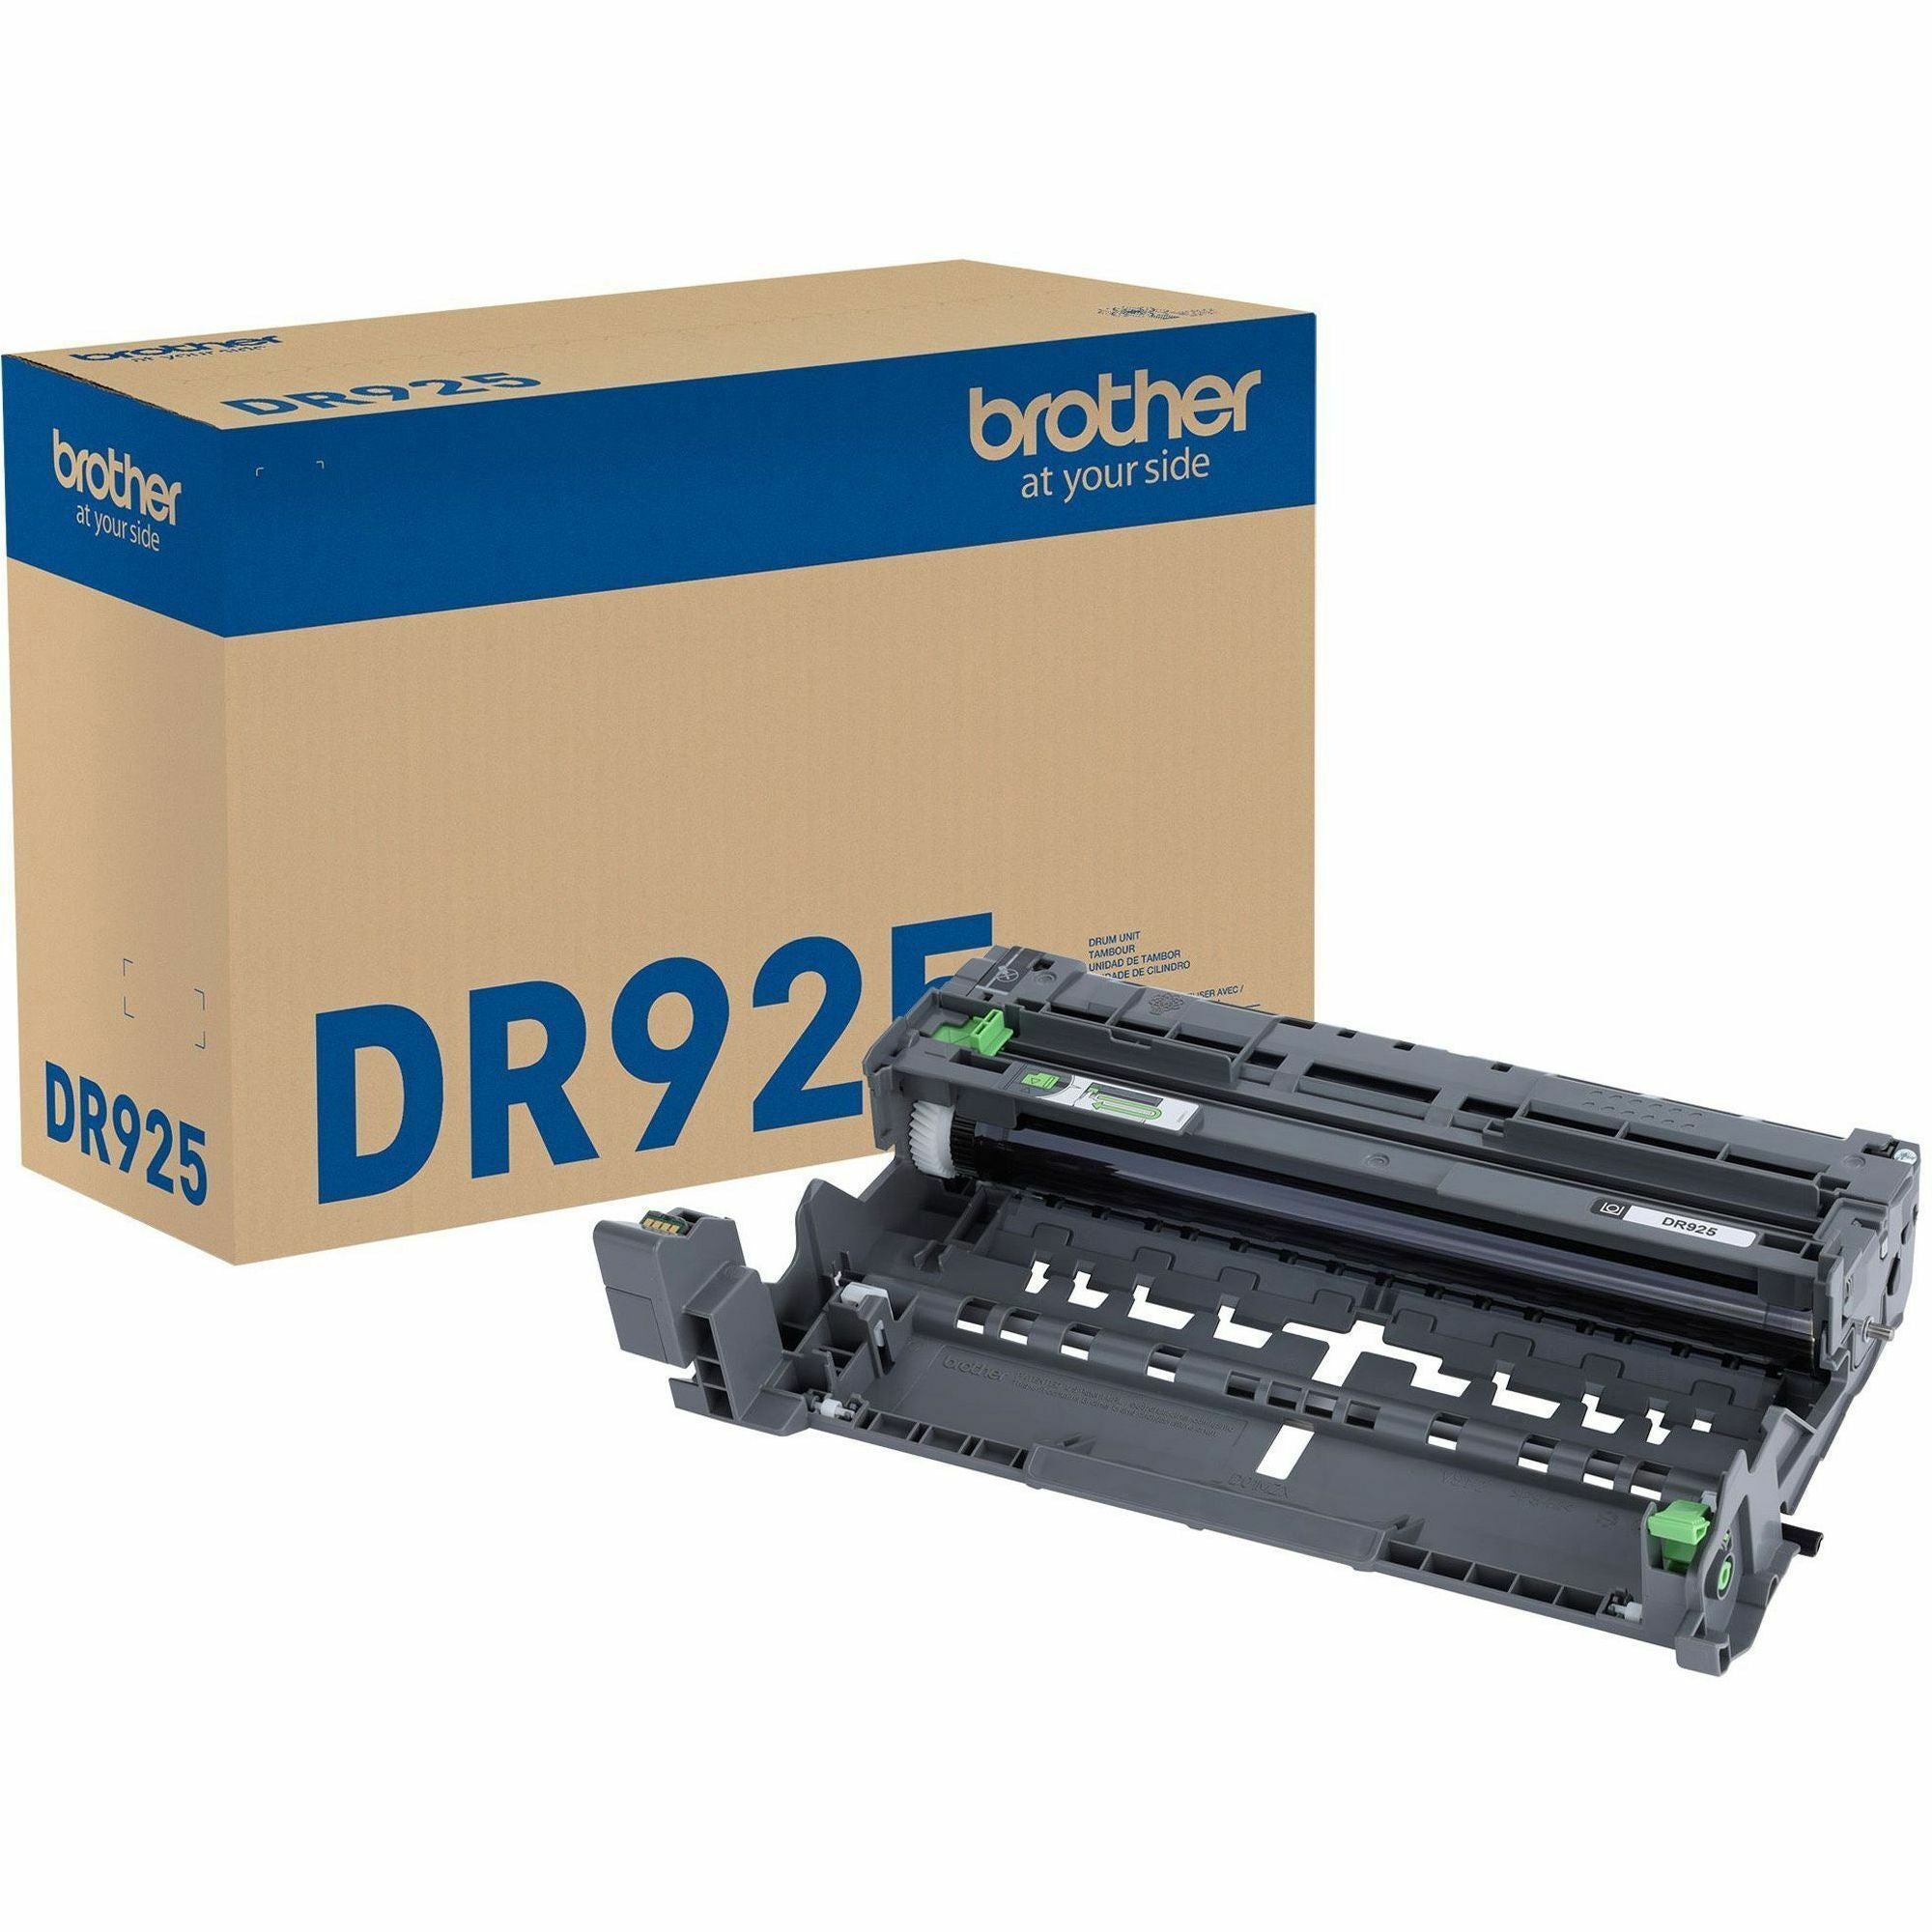 brother-drum-unit-laser-print-technology-75000-pages_brtdr925 - 1